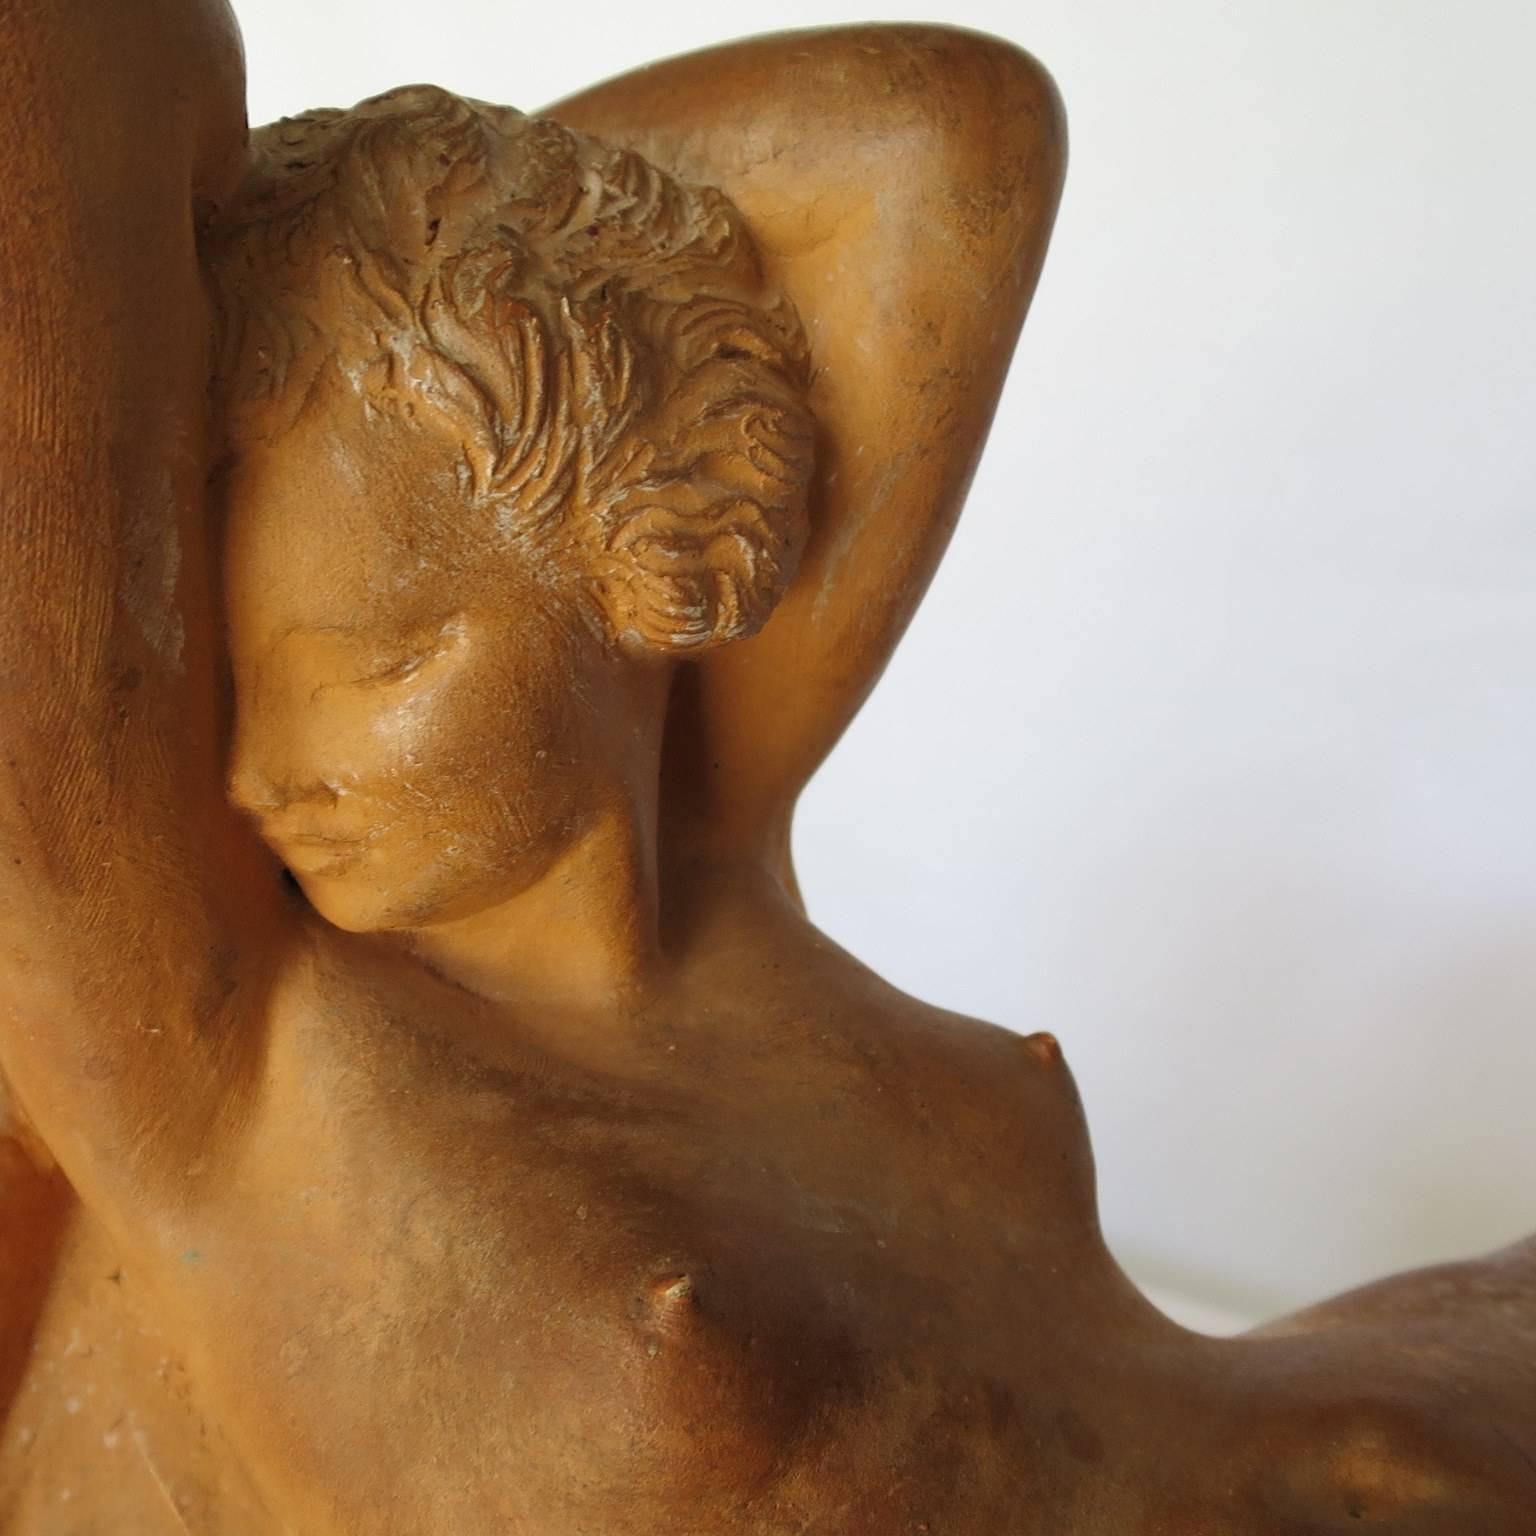 Eminent sculptor born in Naples, Italia, living and working, early 1909 in Paris.
He is the foundator of the neoclassical Parisian School of sculpture in 1932.
He used to work in Rodin's workshop and met the most famous Sculptors in the time.
He